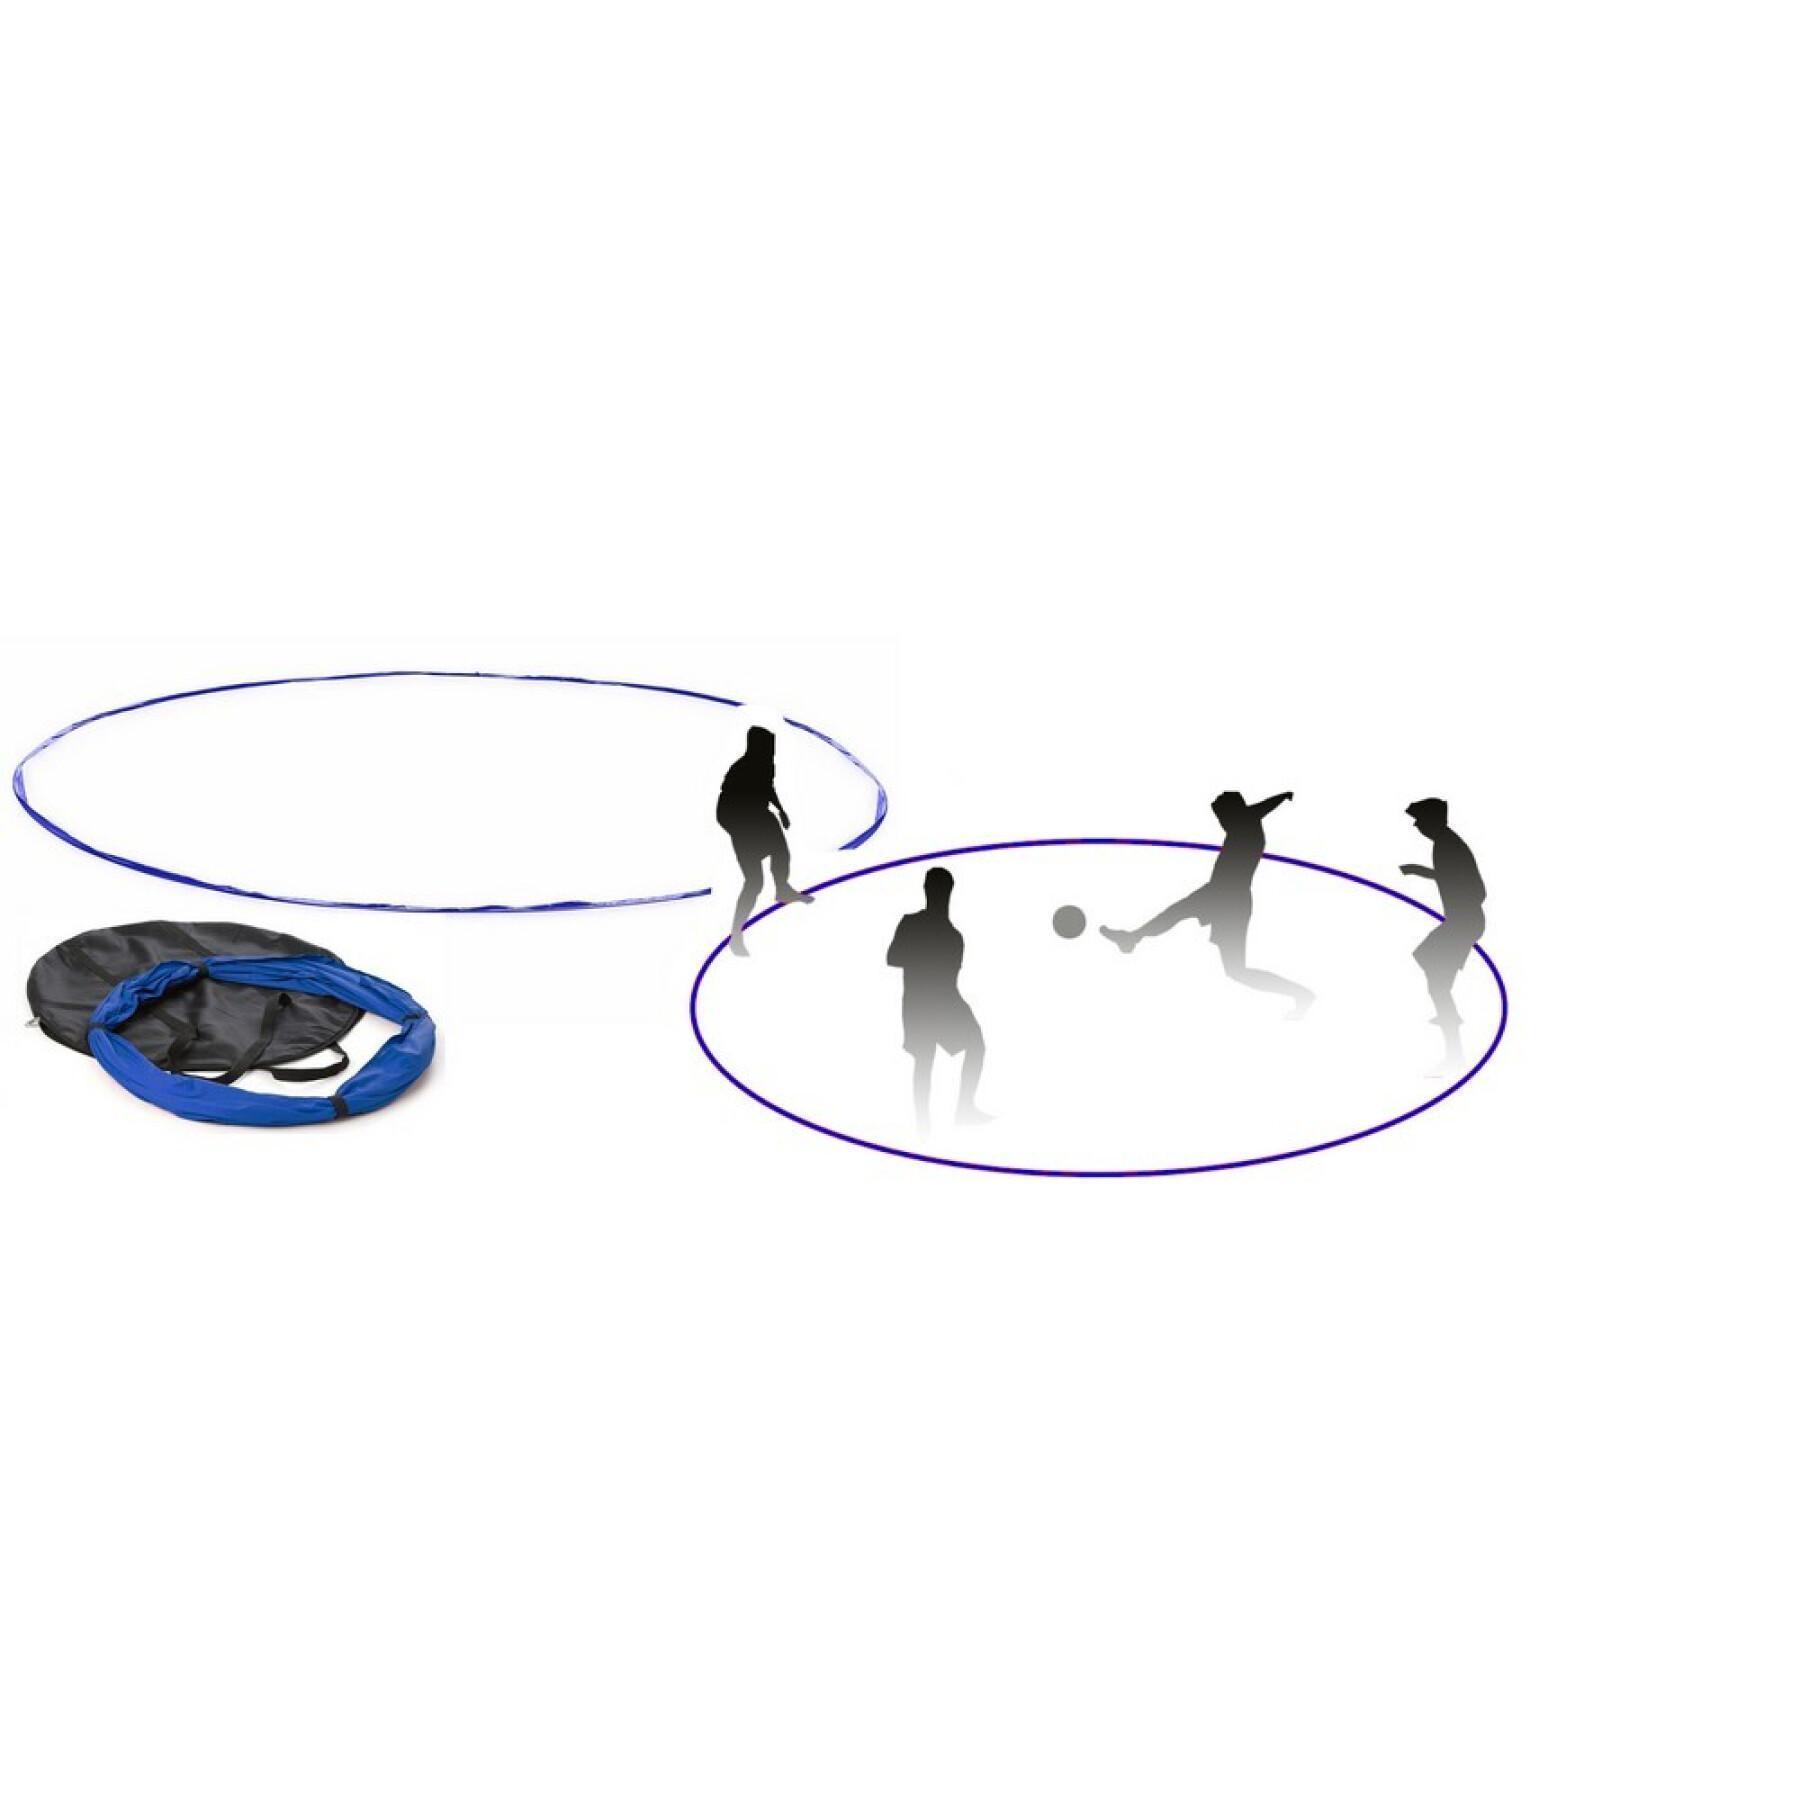 Circle for playing the toro Tremblay CT